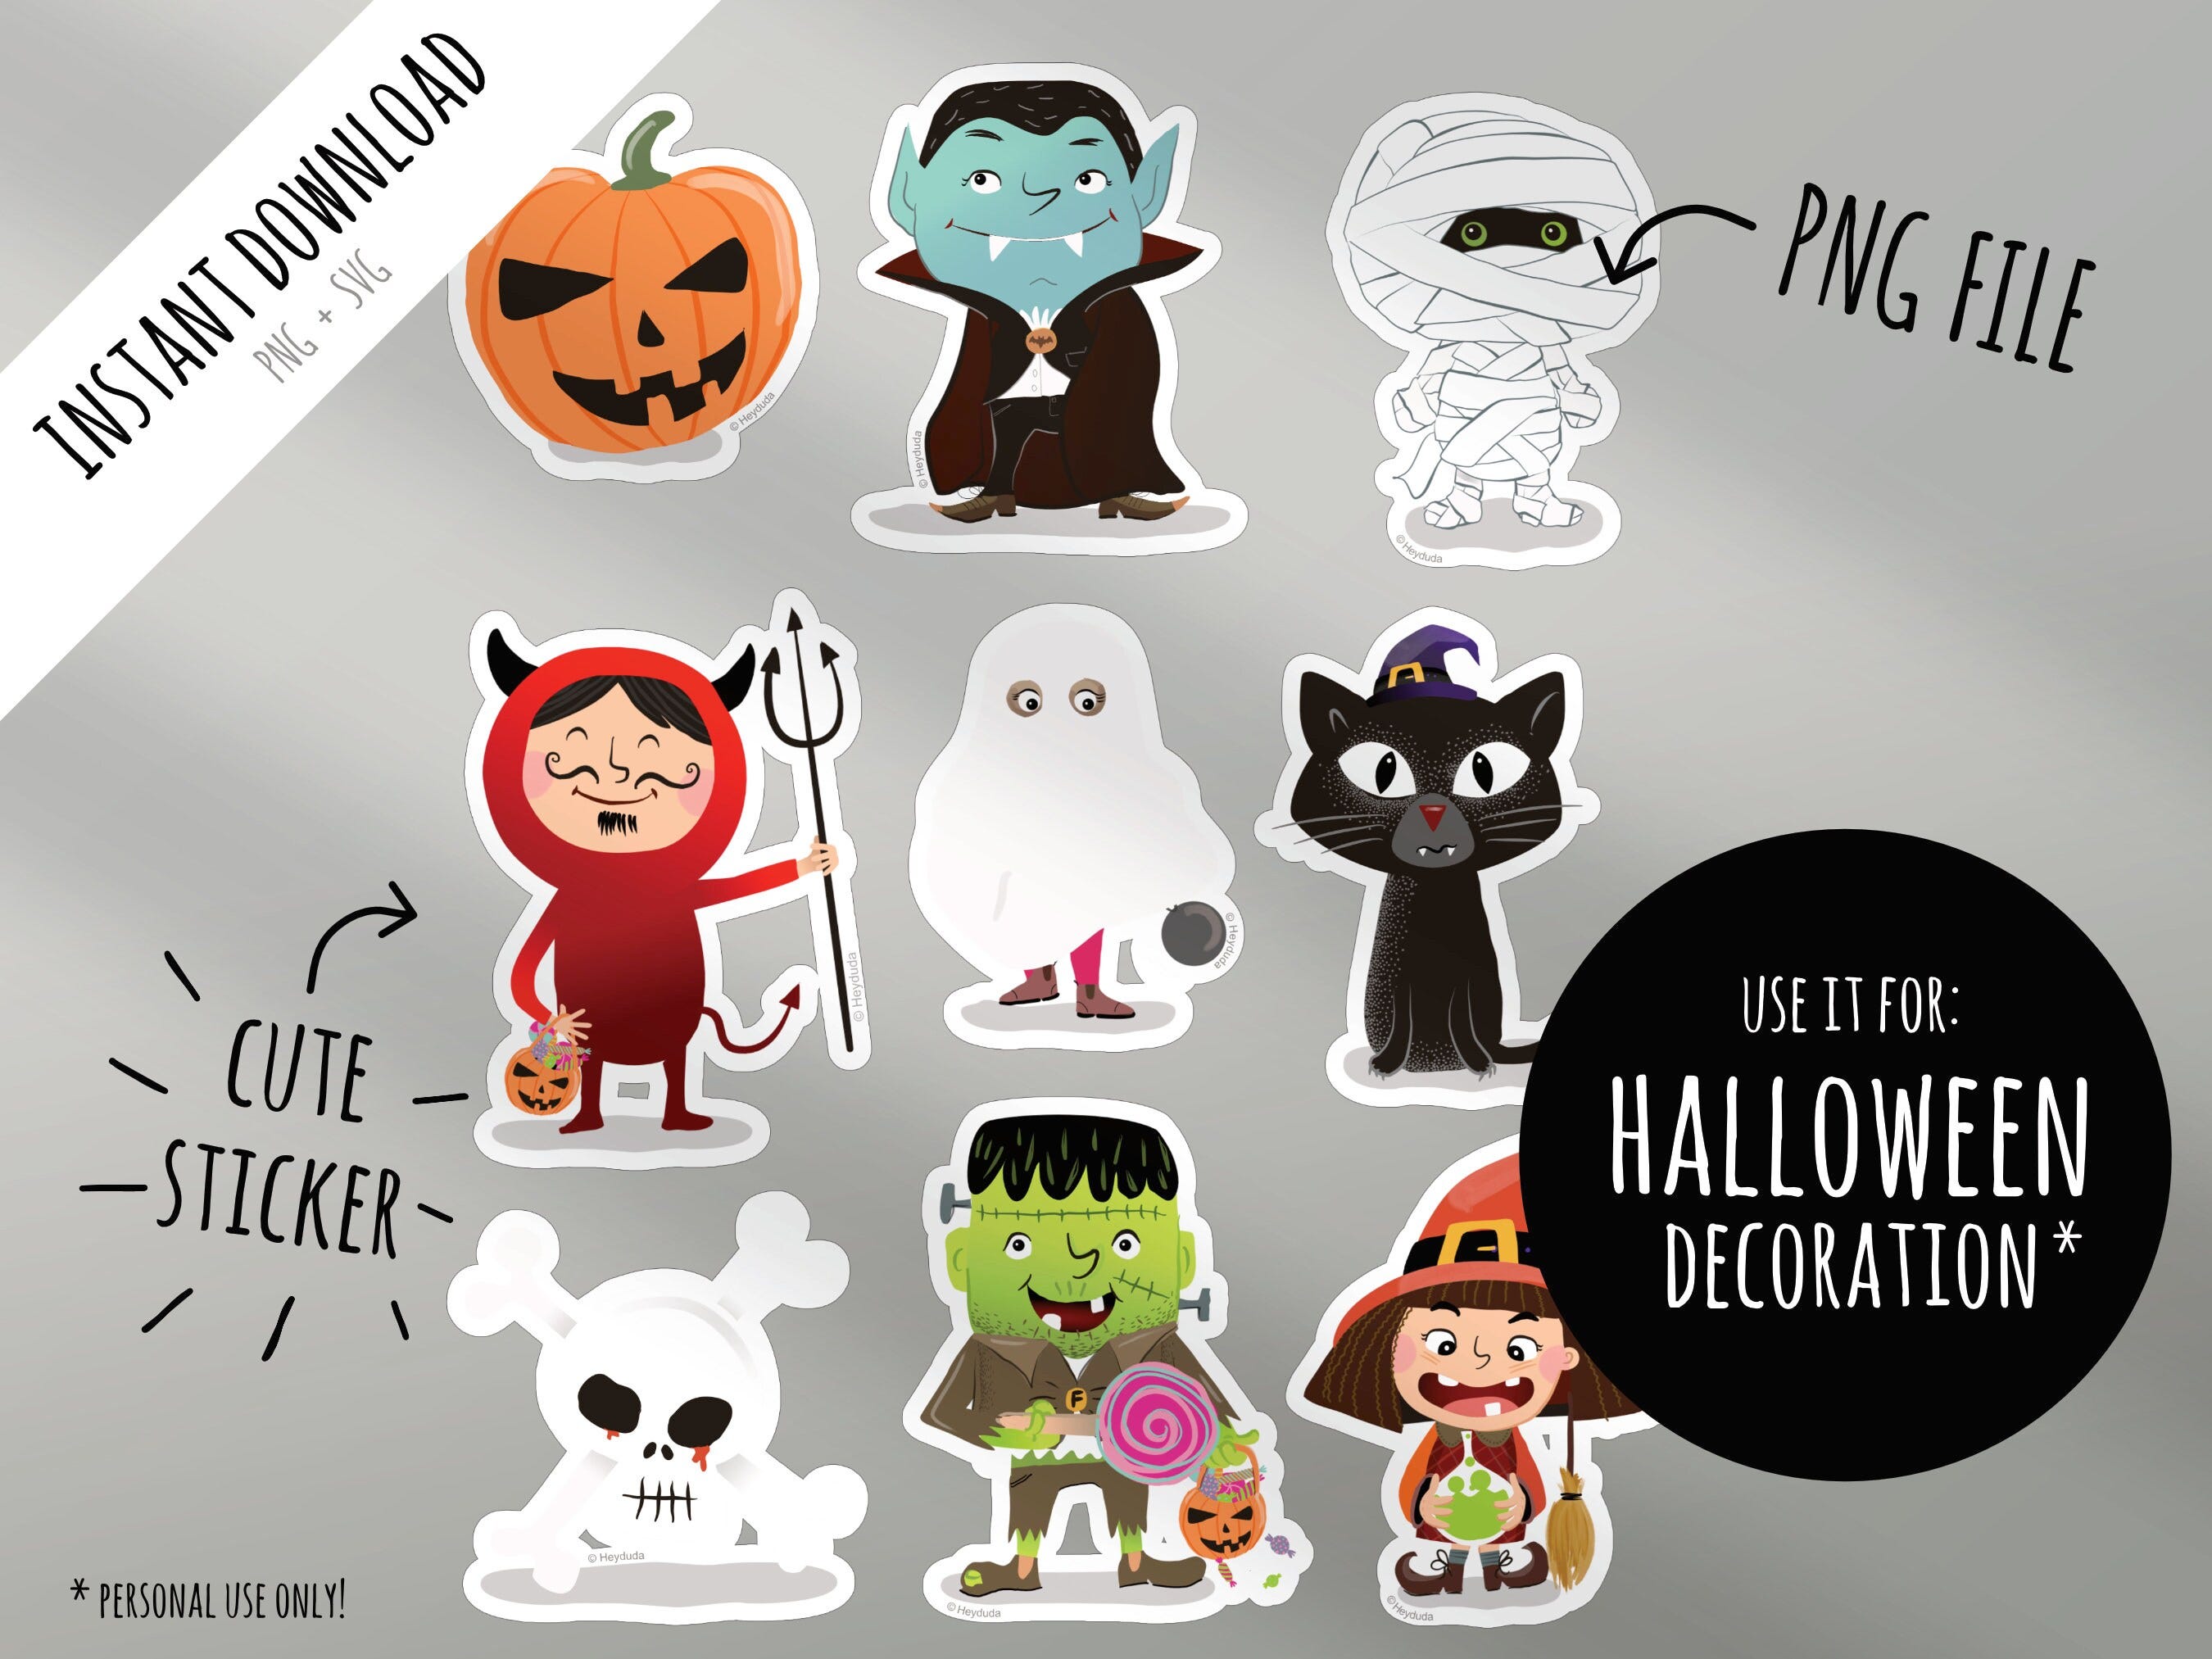 Halloween DIY party craft template (stickers and garland) to print out